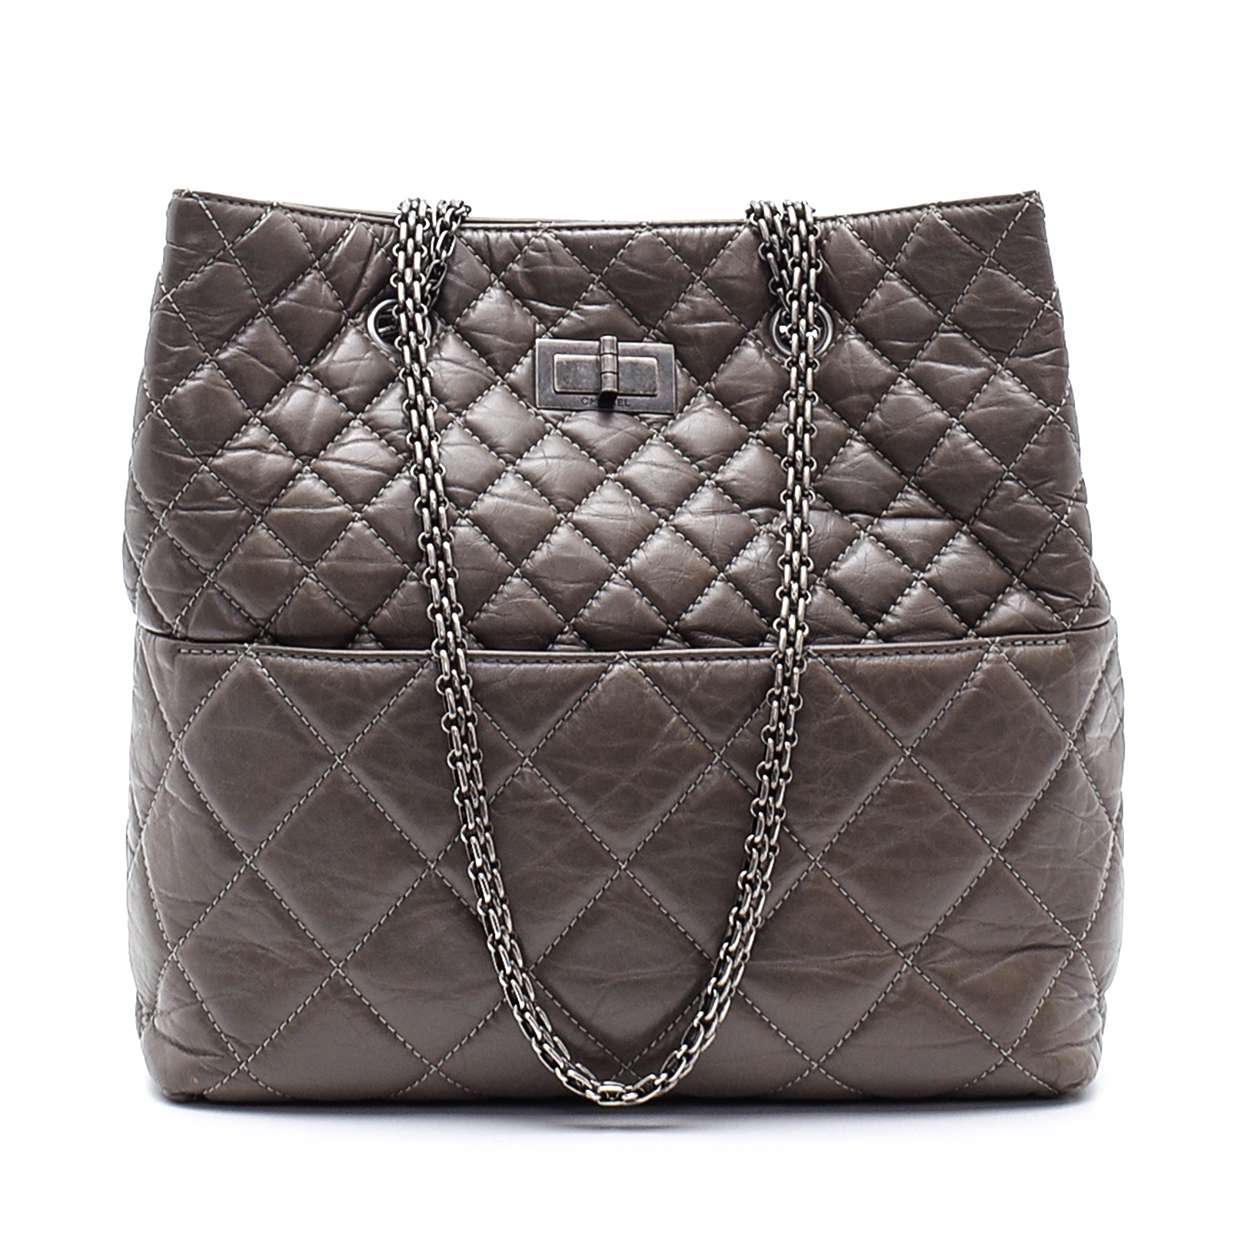 Chanel - Grey Quilted Lambskin Leather Classic in the Business Reissue Tote Bag